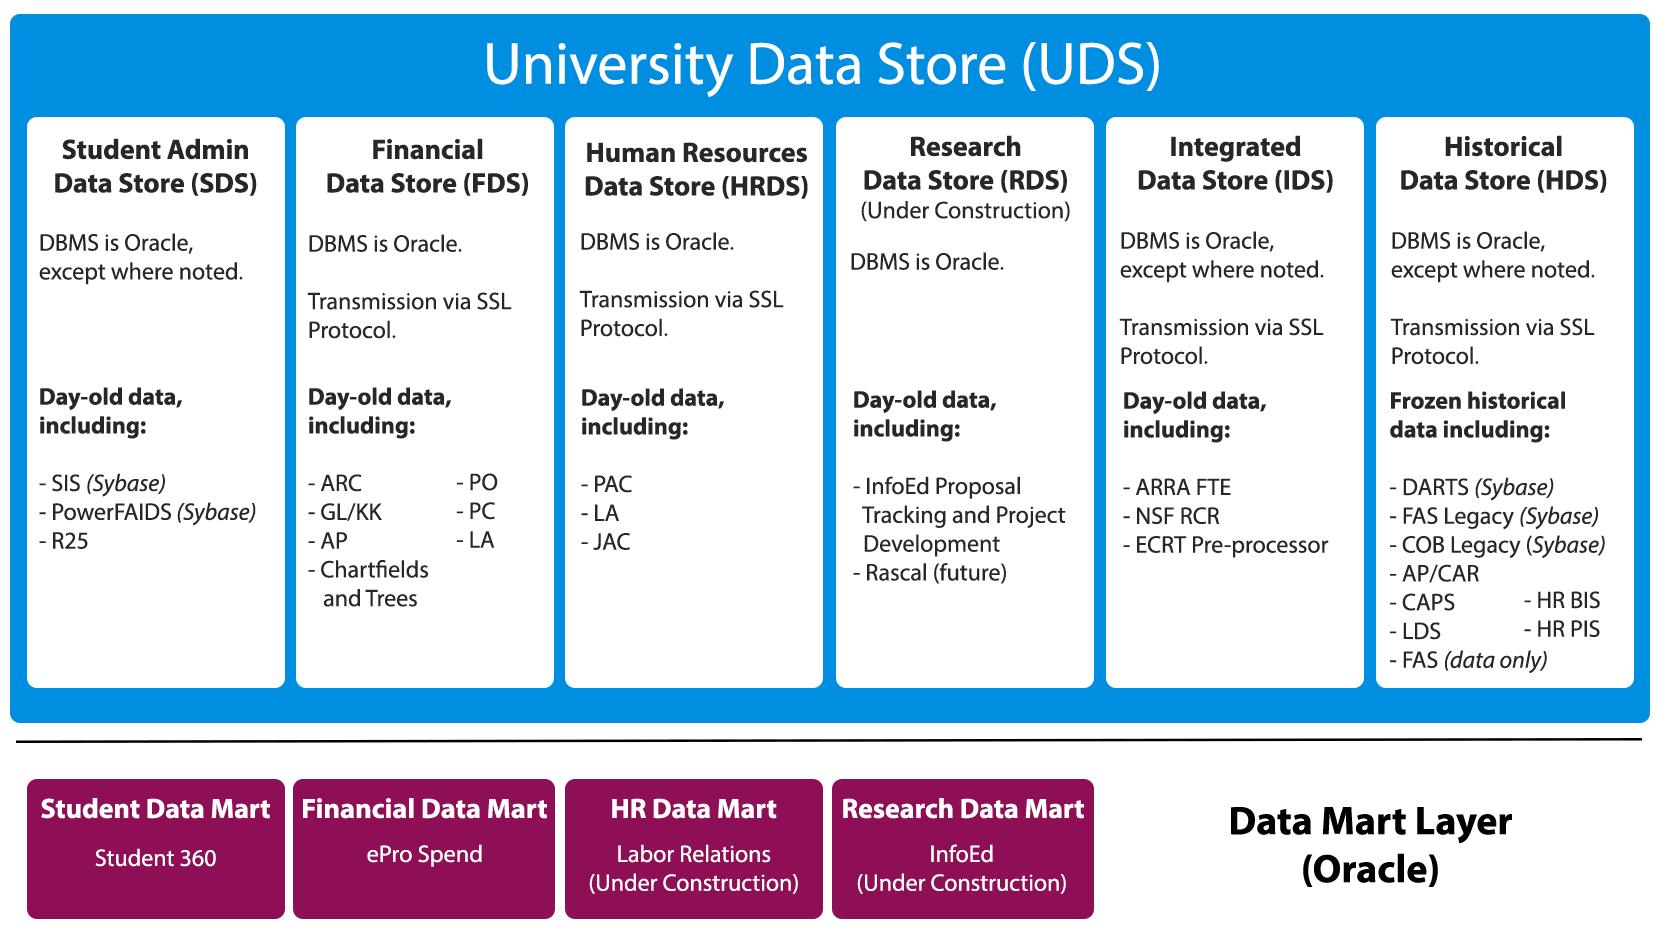 University Data Store: Comprised of Student Admin Data Store (SDS), Financial Data Store (FDS), Human Resources Data Store (HRDS), Research Data Store (RDS), Integrated Data Store (IDS), and Historical Data Store (HDS). The Data Mart Layer (Oracle) include the Student Data Mart, Financial Data Mart, HR Data Mart, and Research Data Mart.